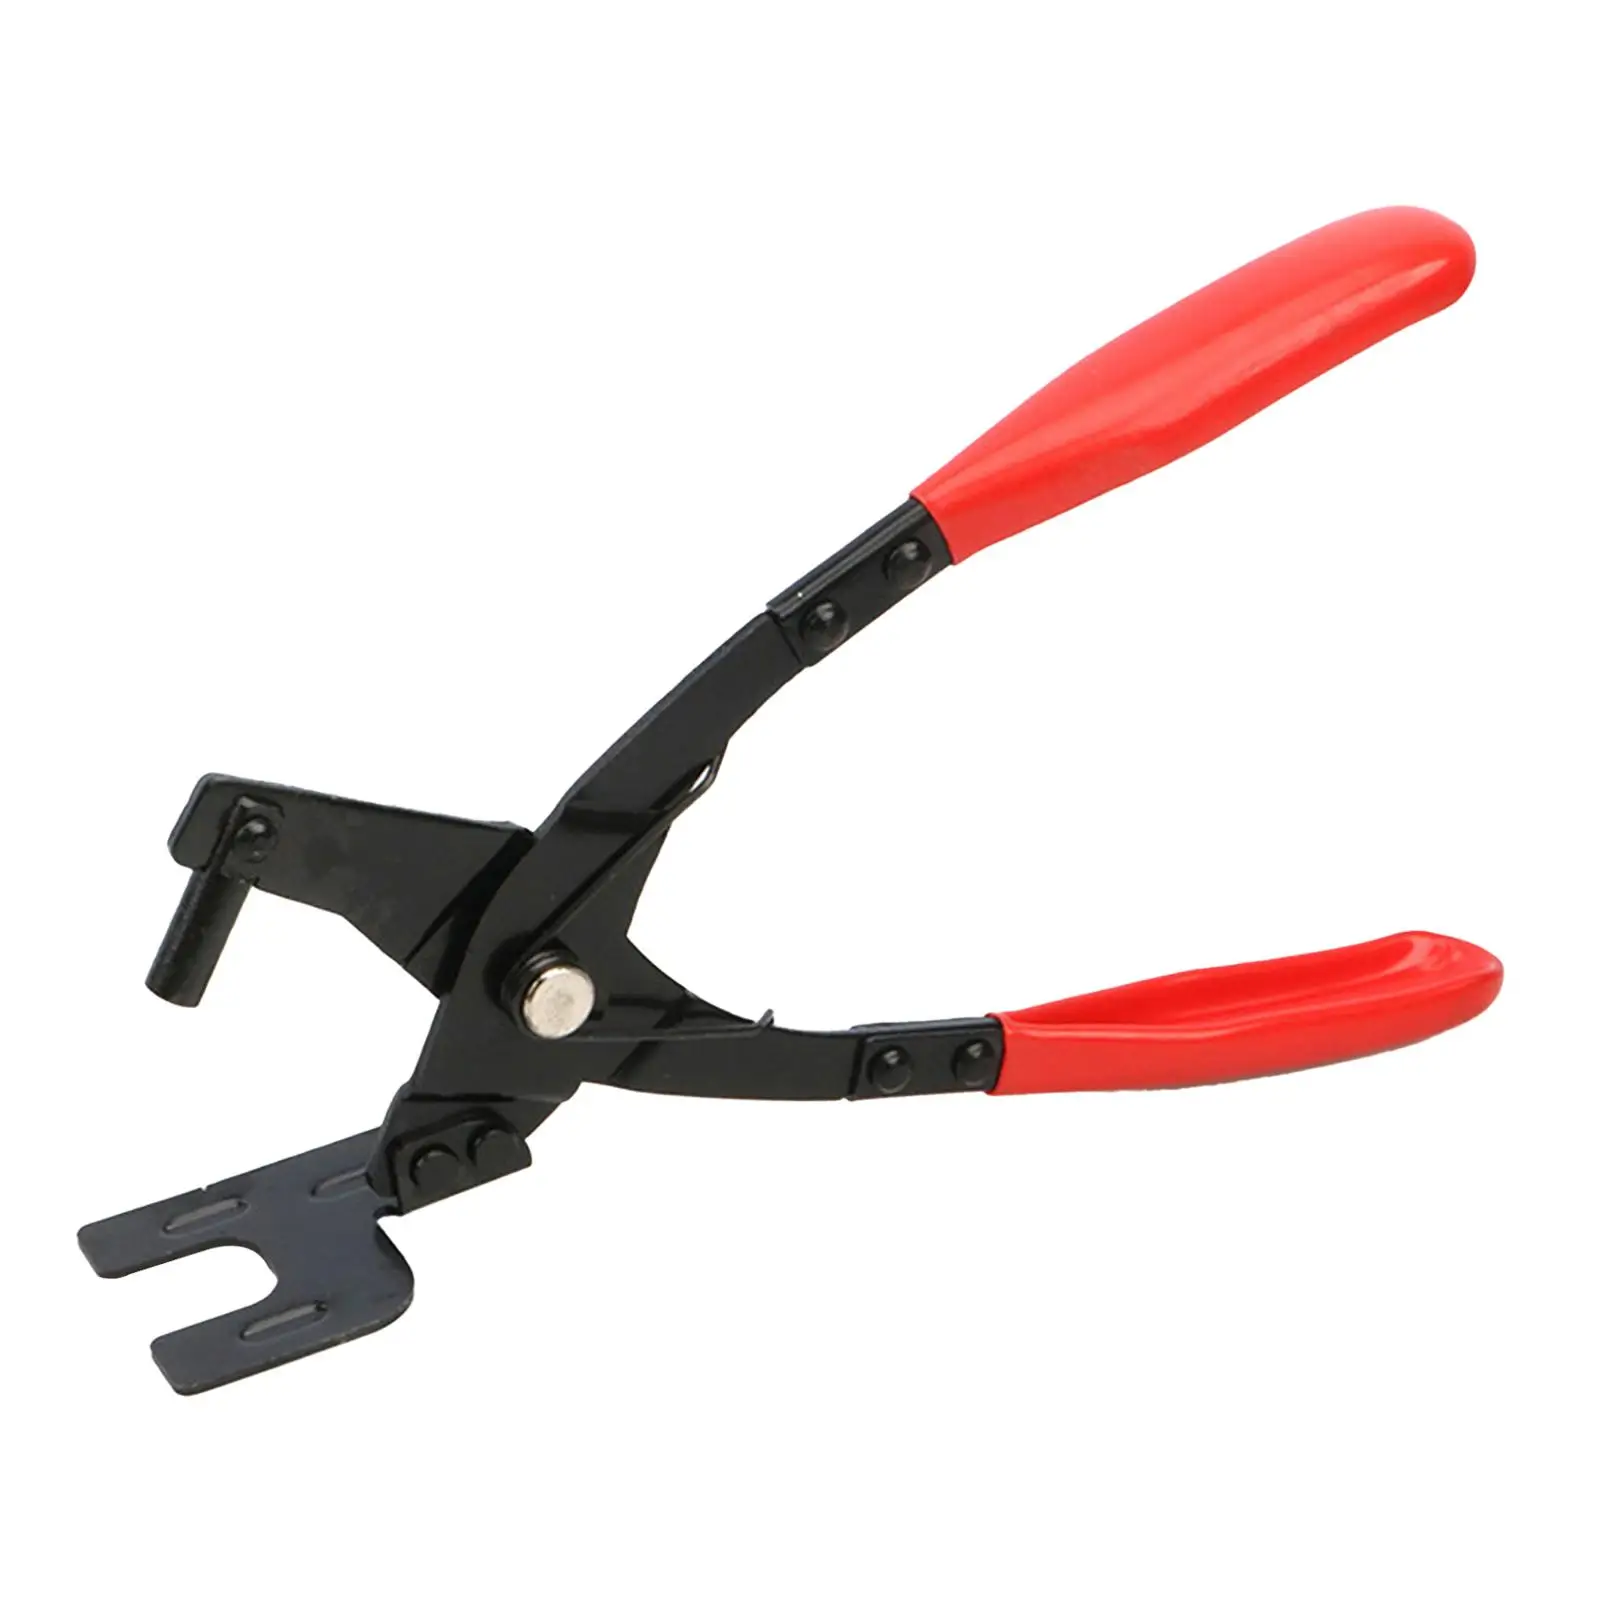 Exhaust Hanger Removal Pliers Hand Operated Tools Anti Slip Muffler Hanger Removal Tool for Access in Hard to Reach Places Red